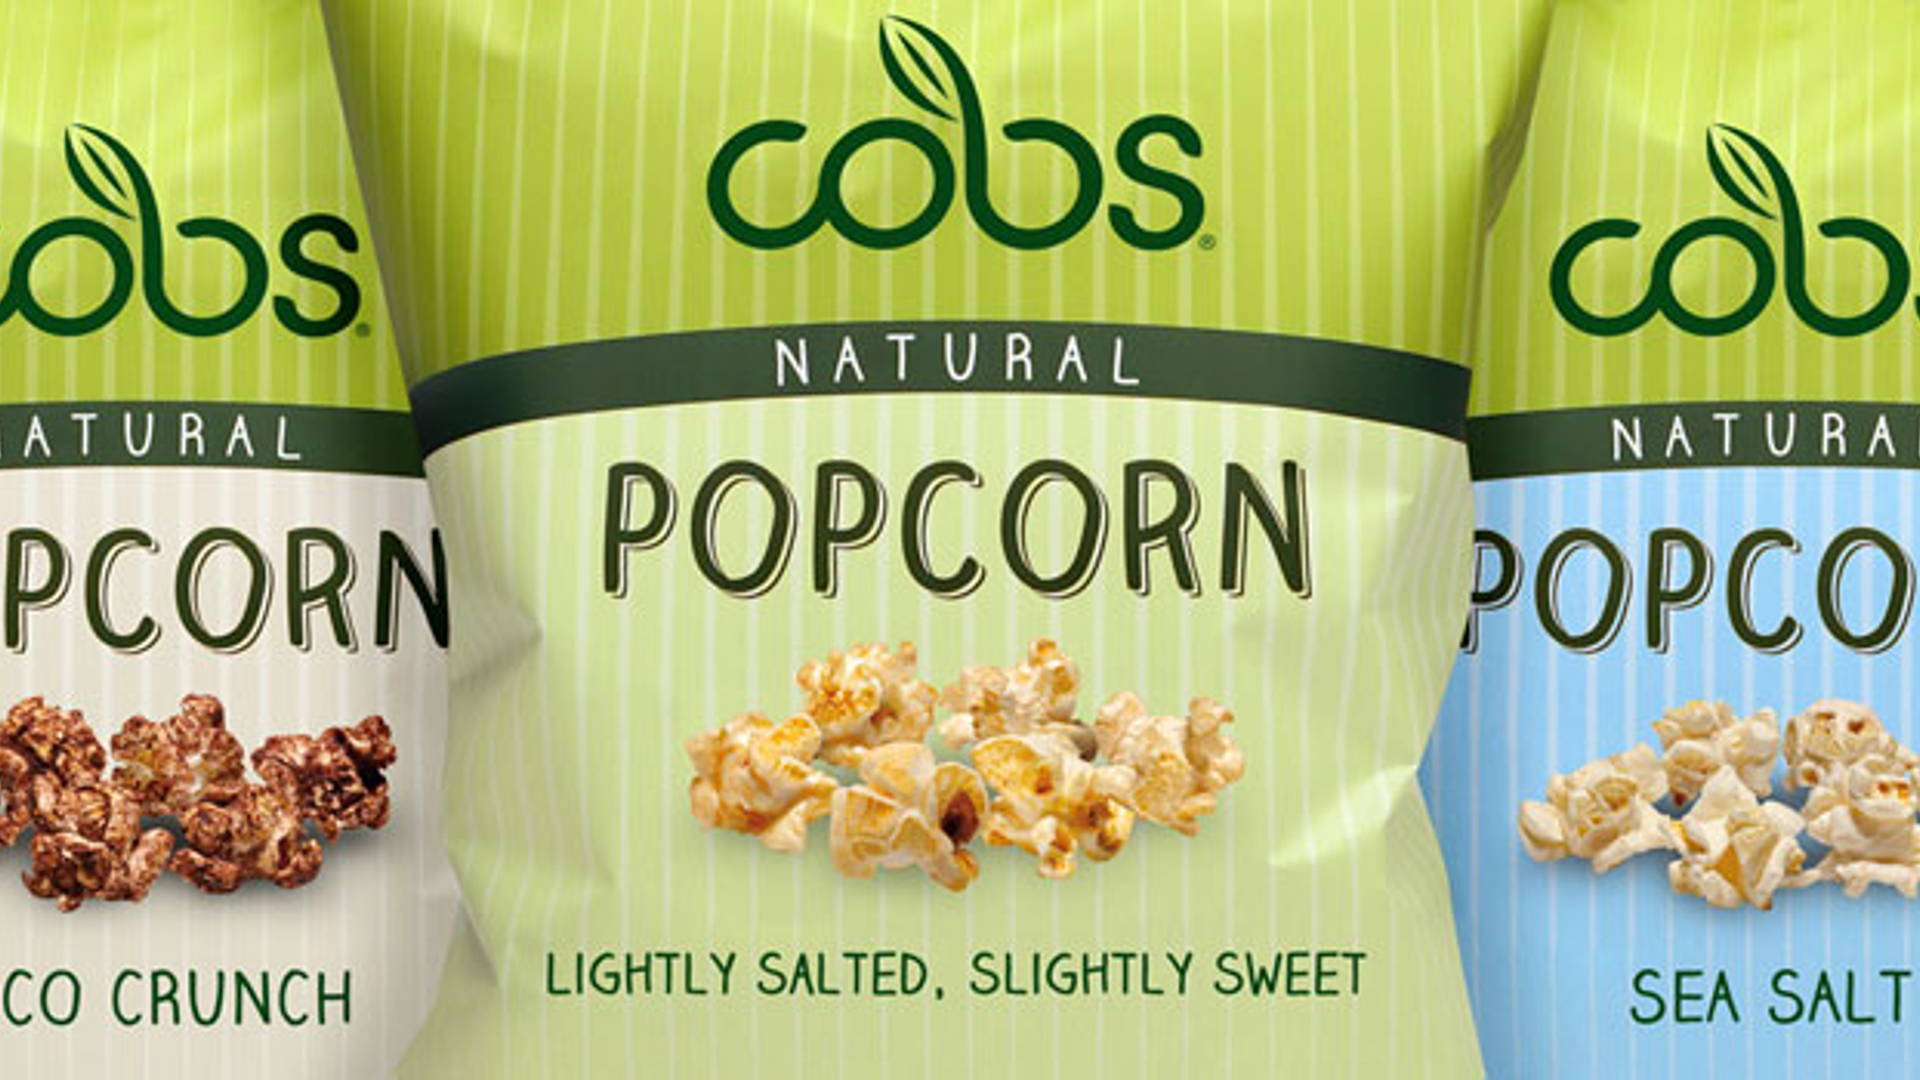 Featured image for Cobs Natural Popcorn 